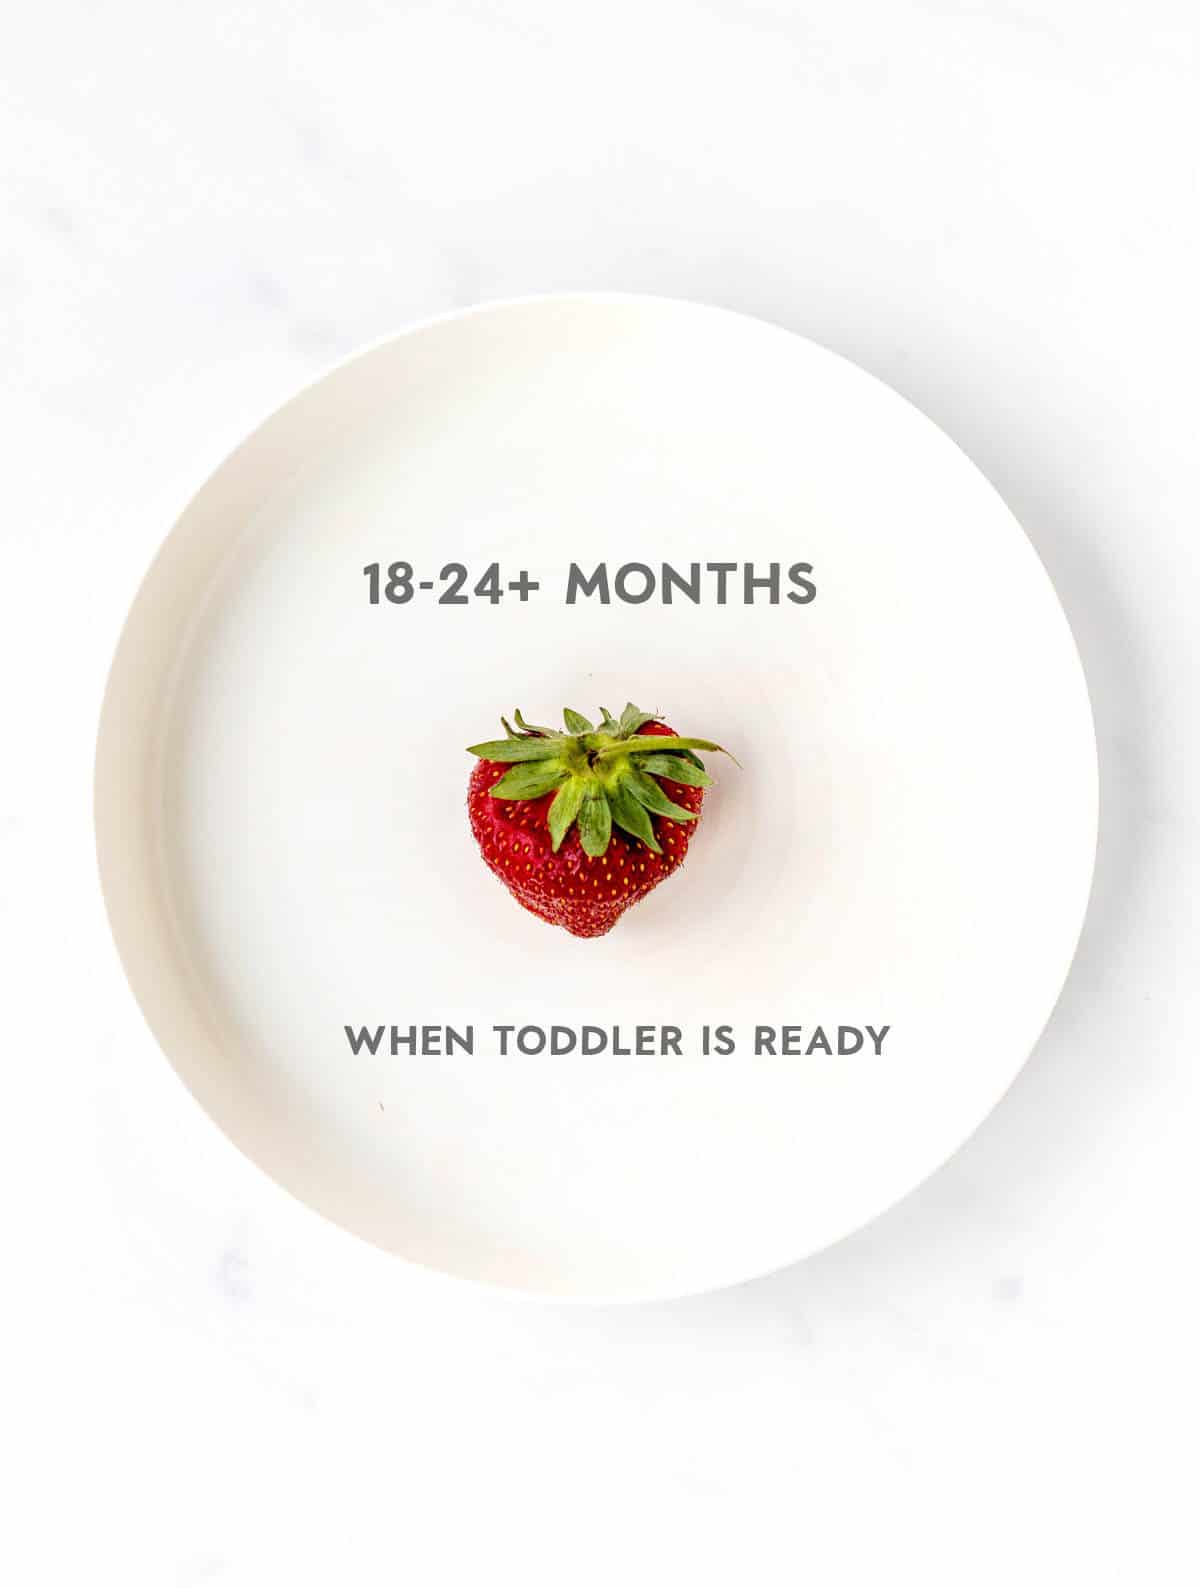 A whole strawberry on a white plate, demonstrating how to serve strawberries for 18-24 month old baby.